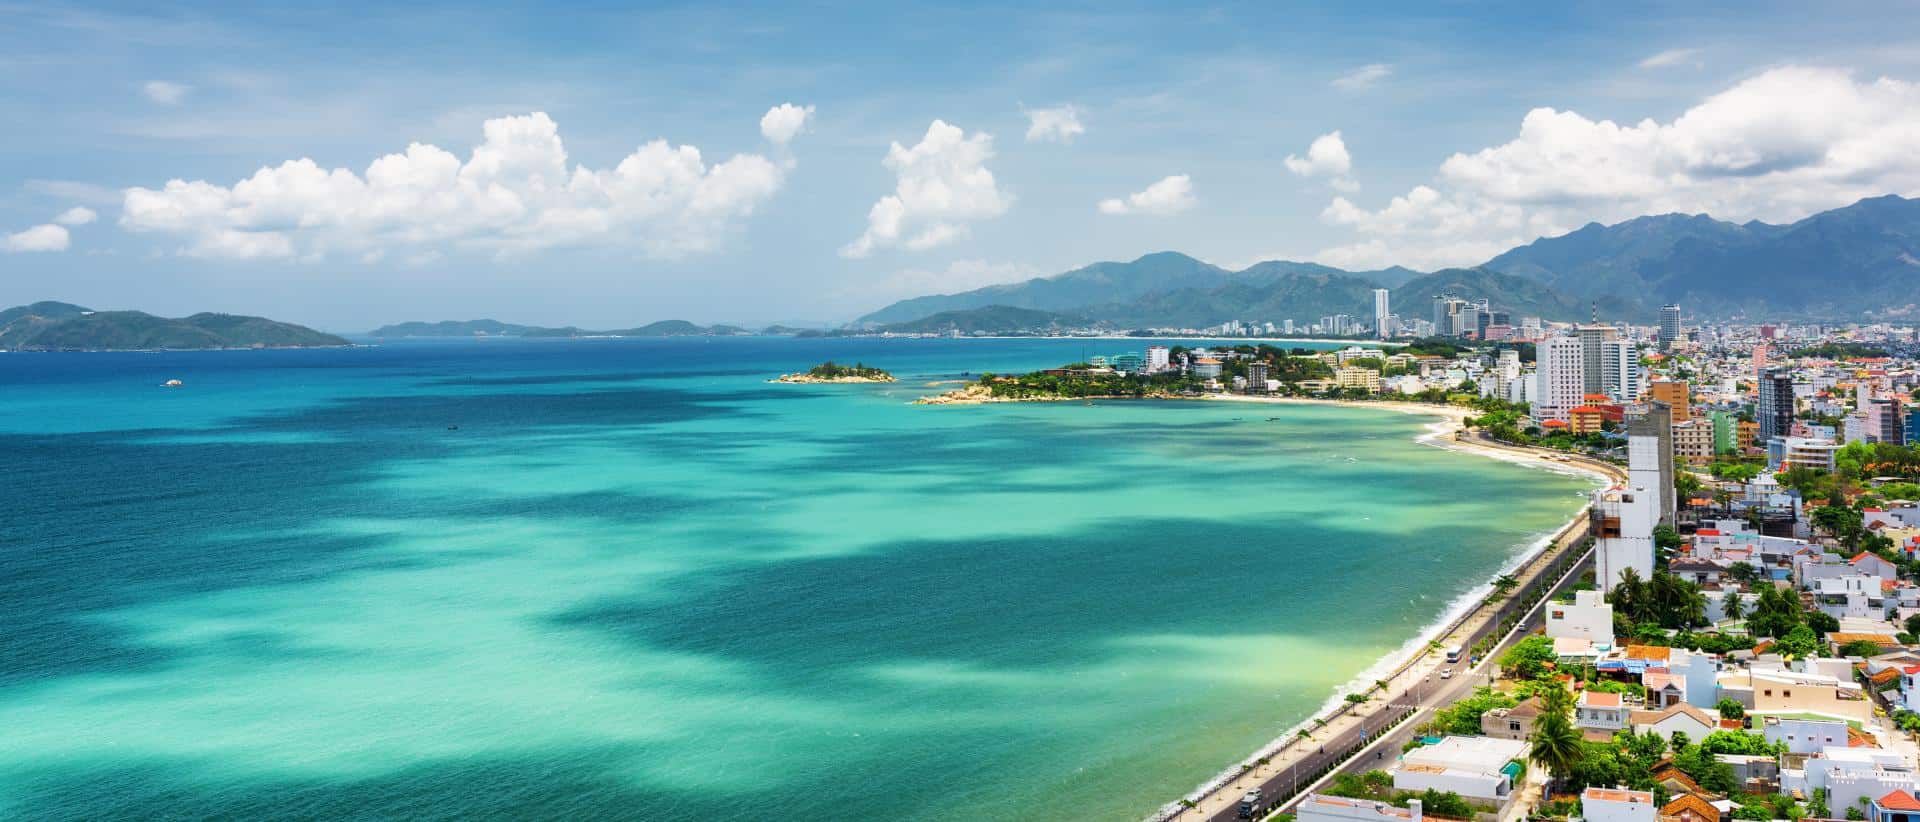 Travel Guide to Hon Tre Island in Nha Trang